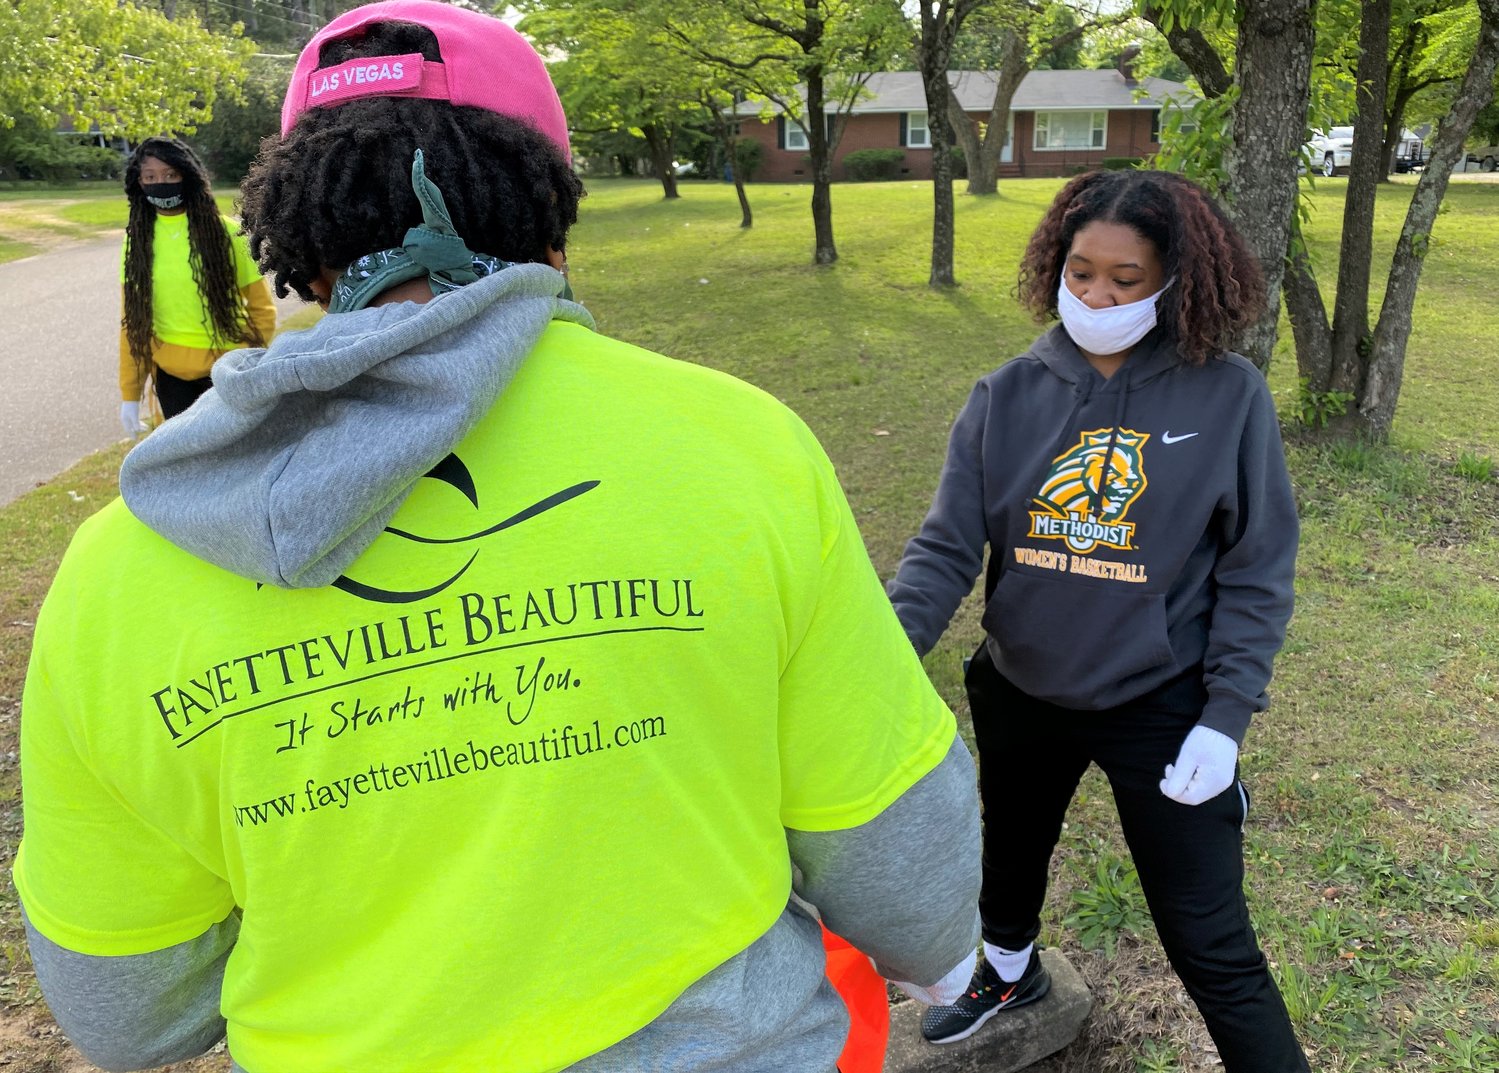 The Fayetteville Beautiful litter cleanup campaign will return Saturday morning.